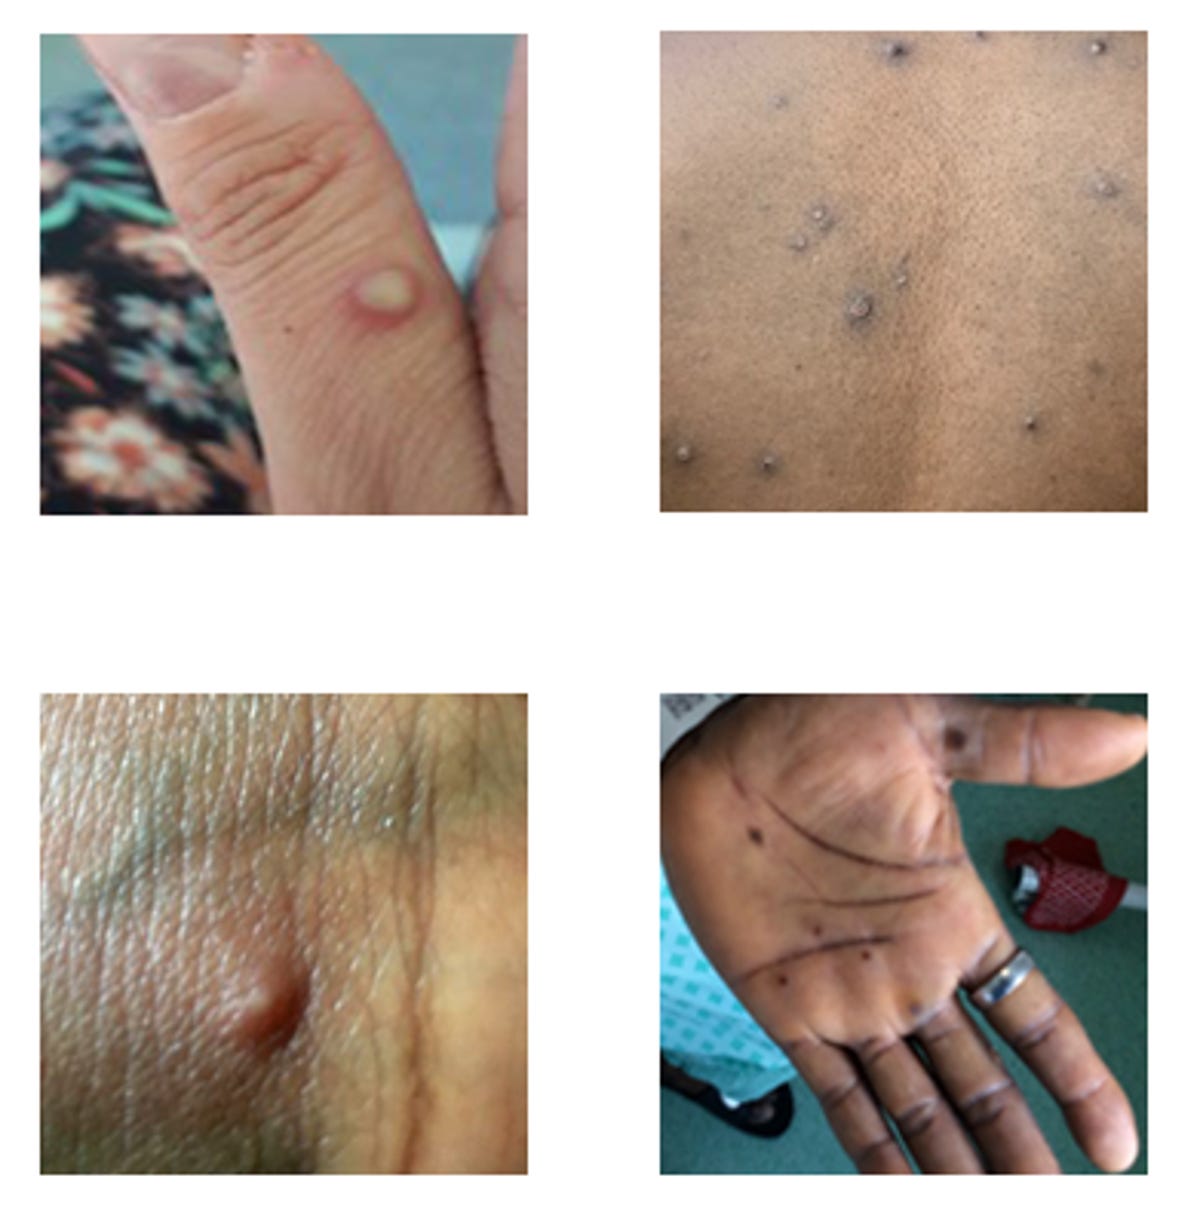 Four different photos of monkeypox blemishes and rashes